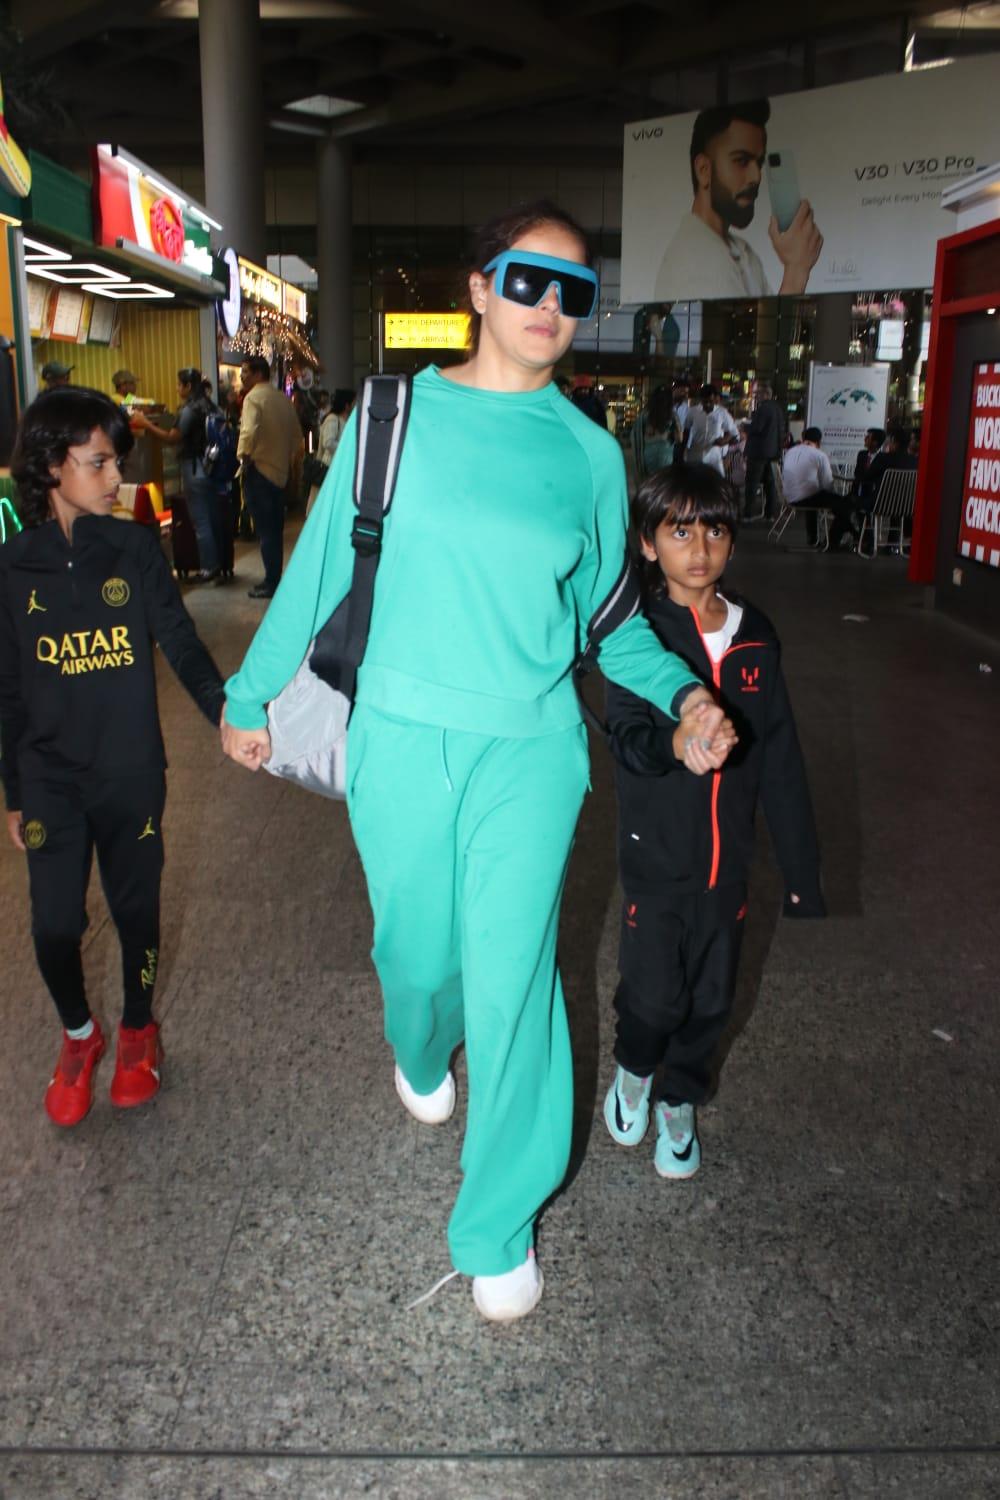 Genelia Deshmukh was also snapped at the airport with her kids